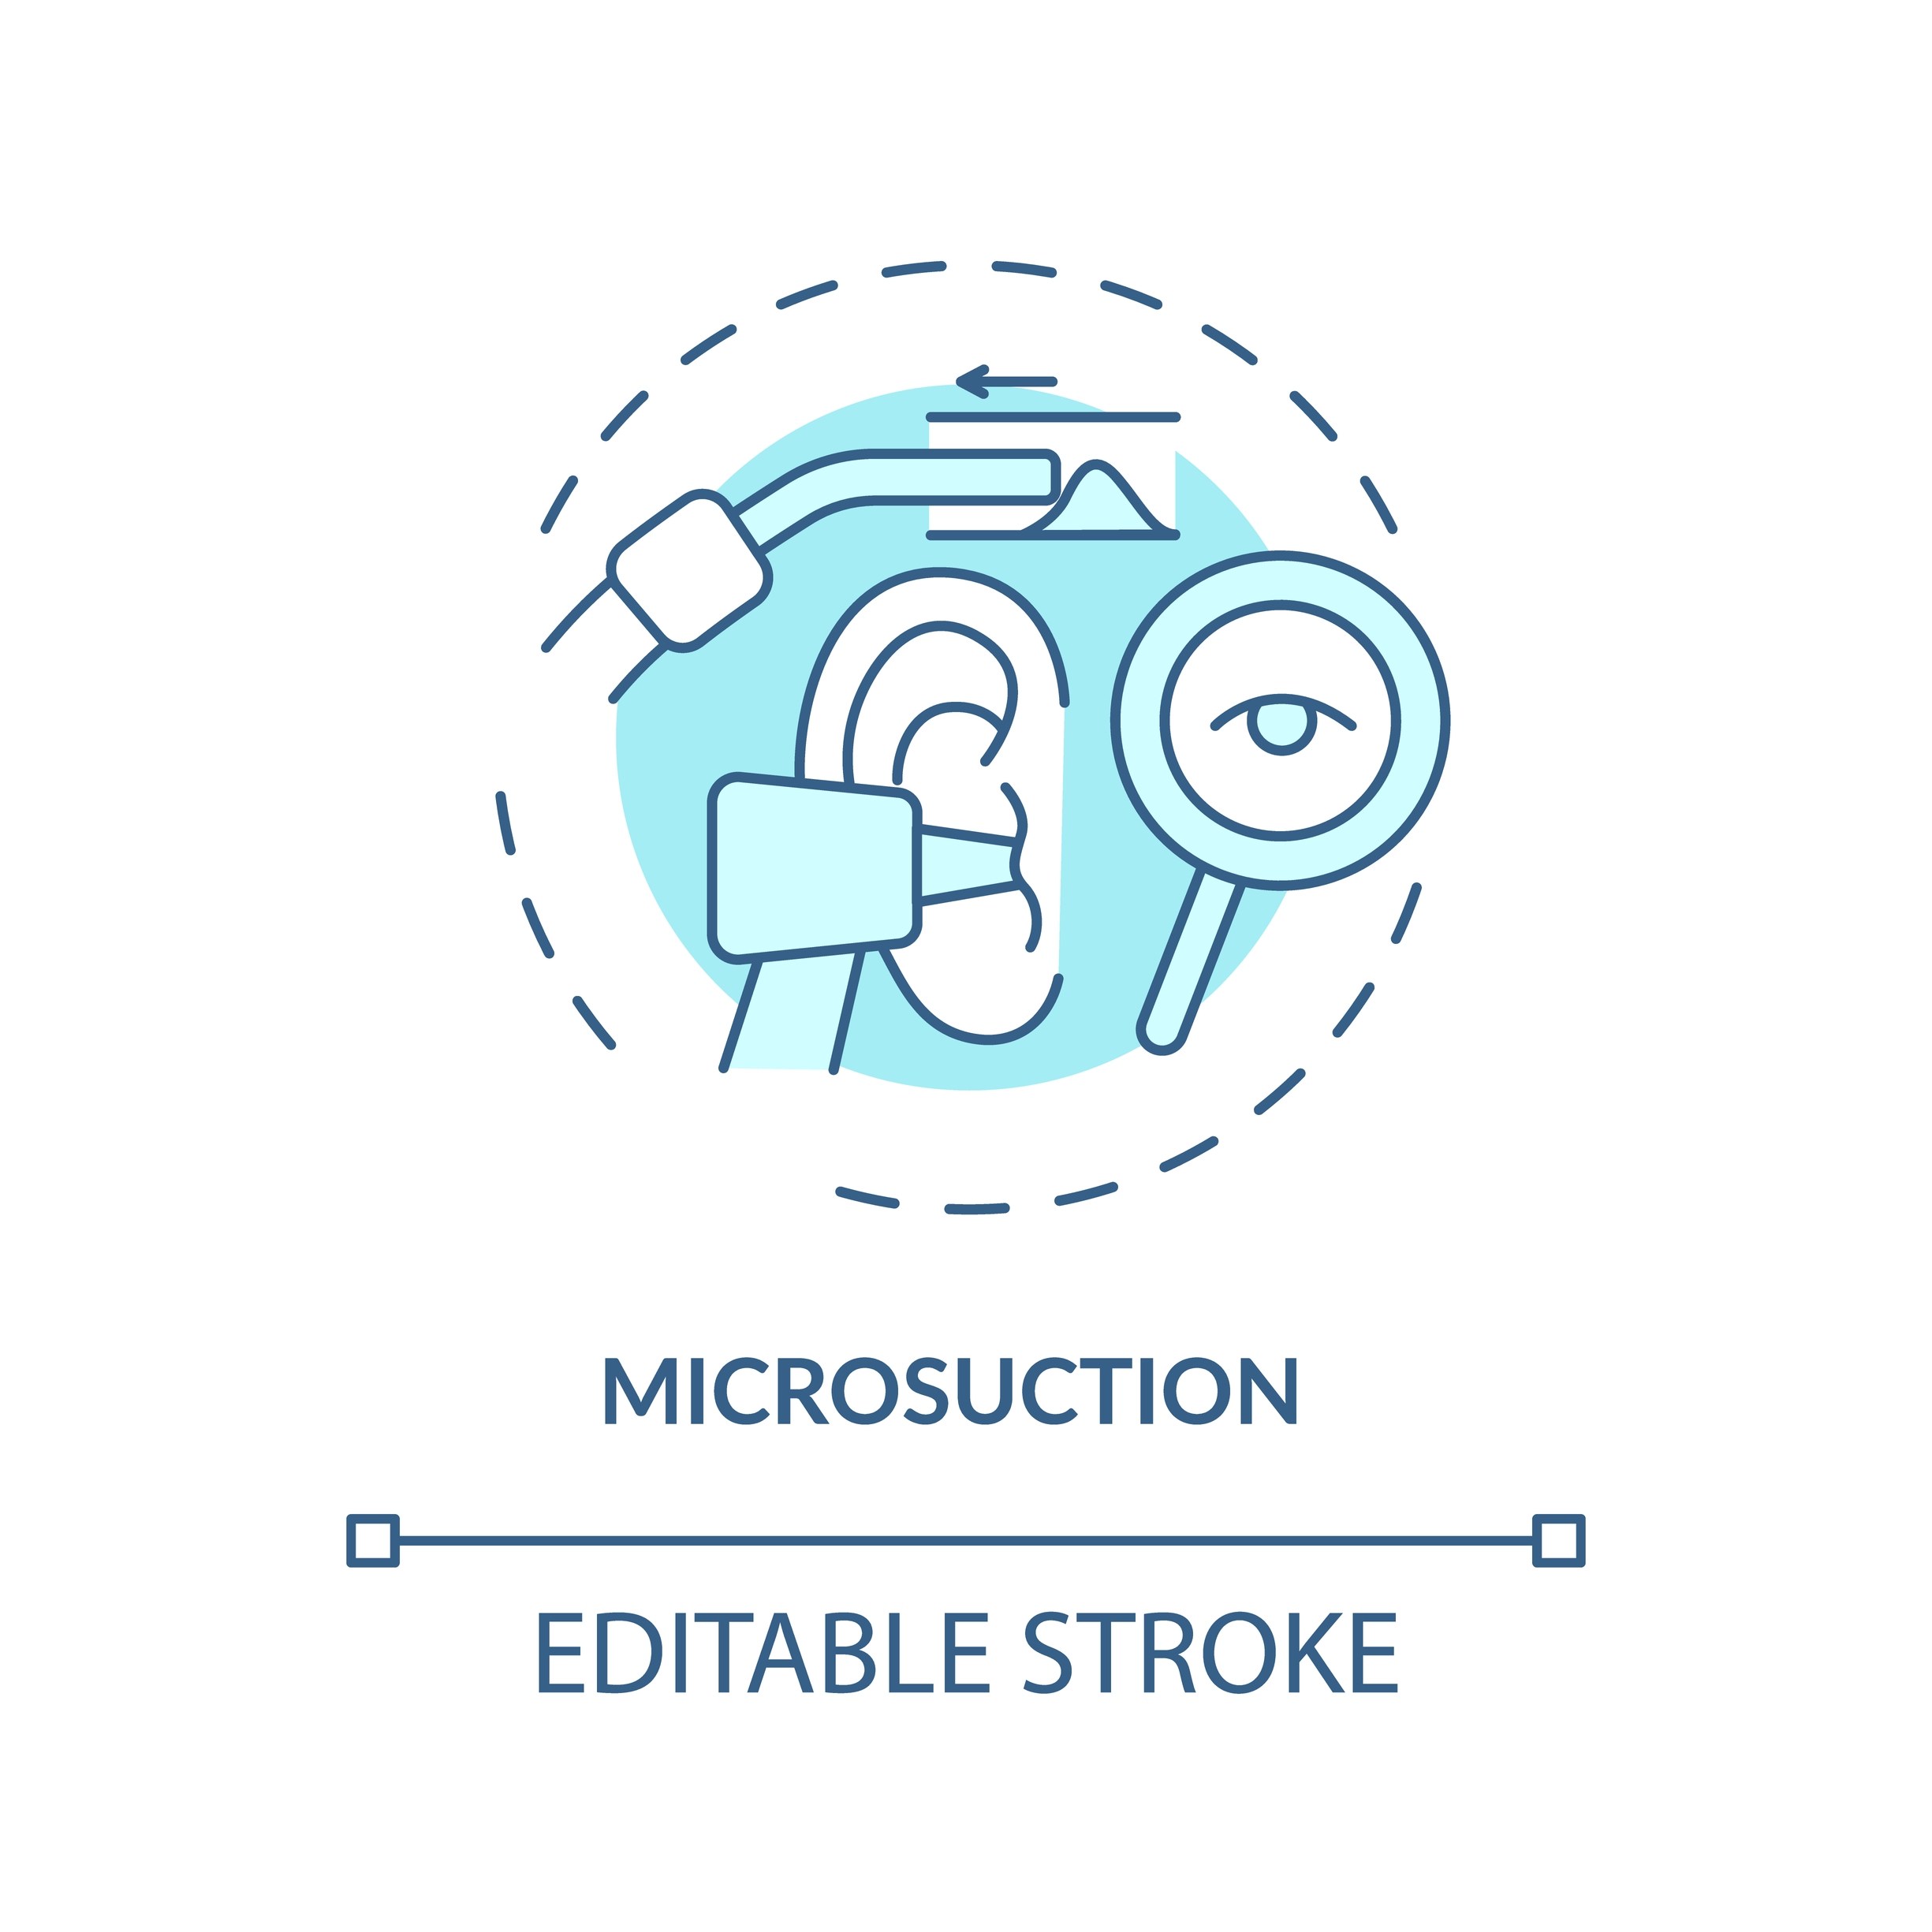 Ear microsuction : What are the benefits? 